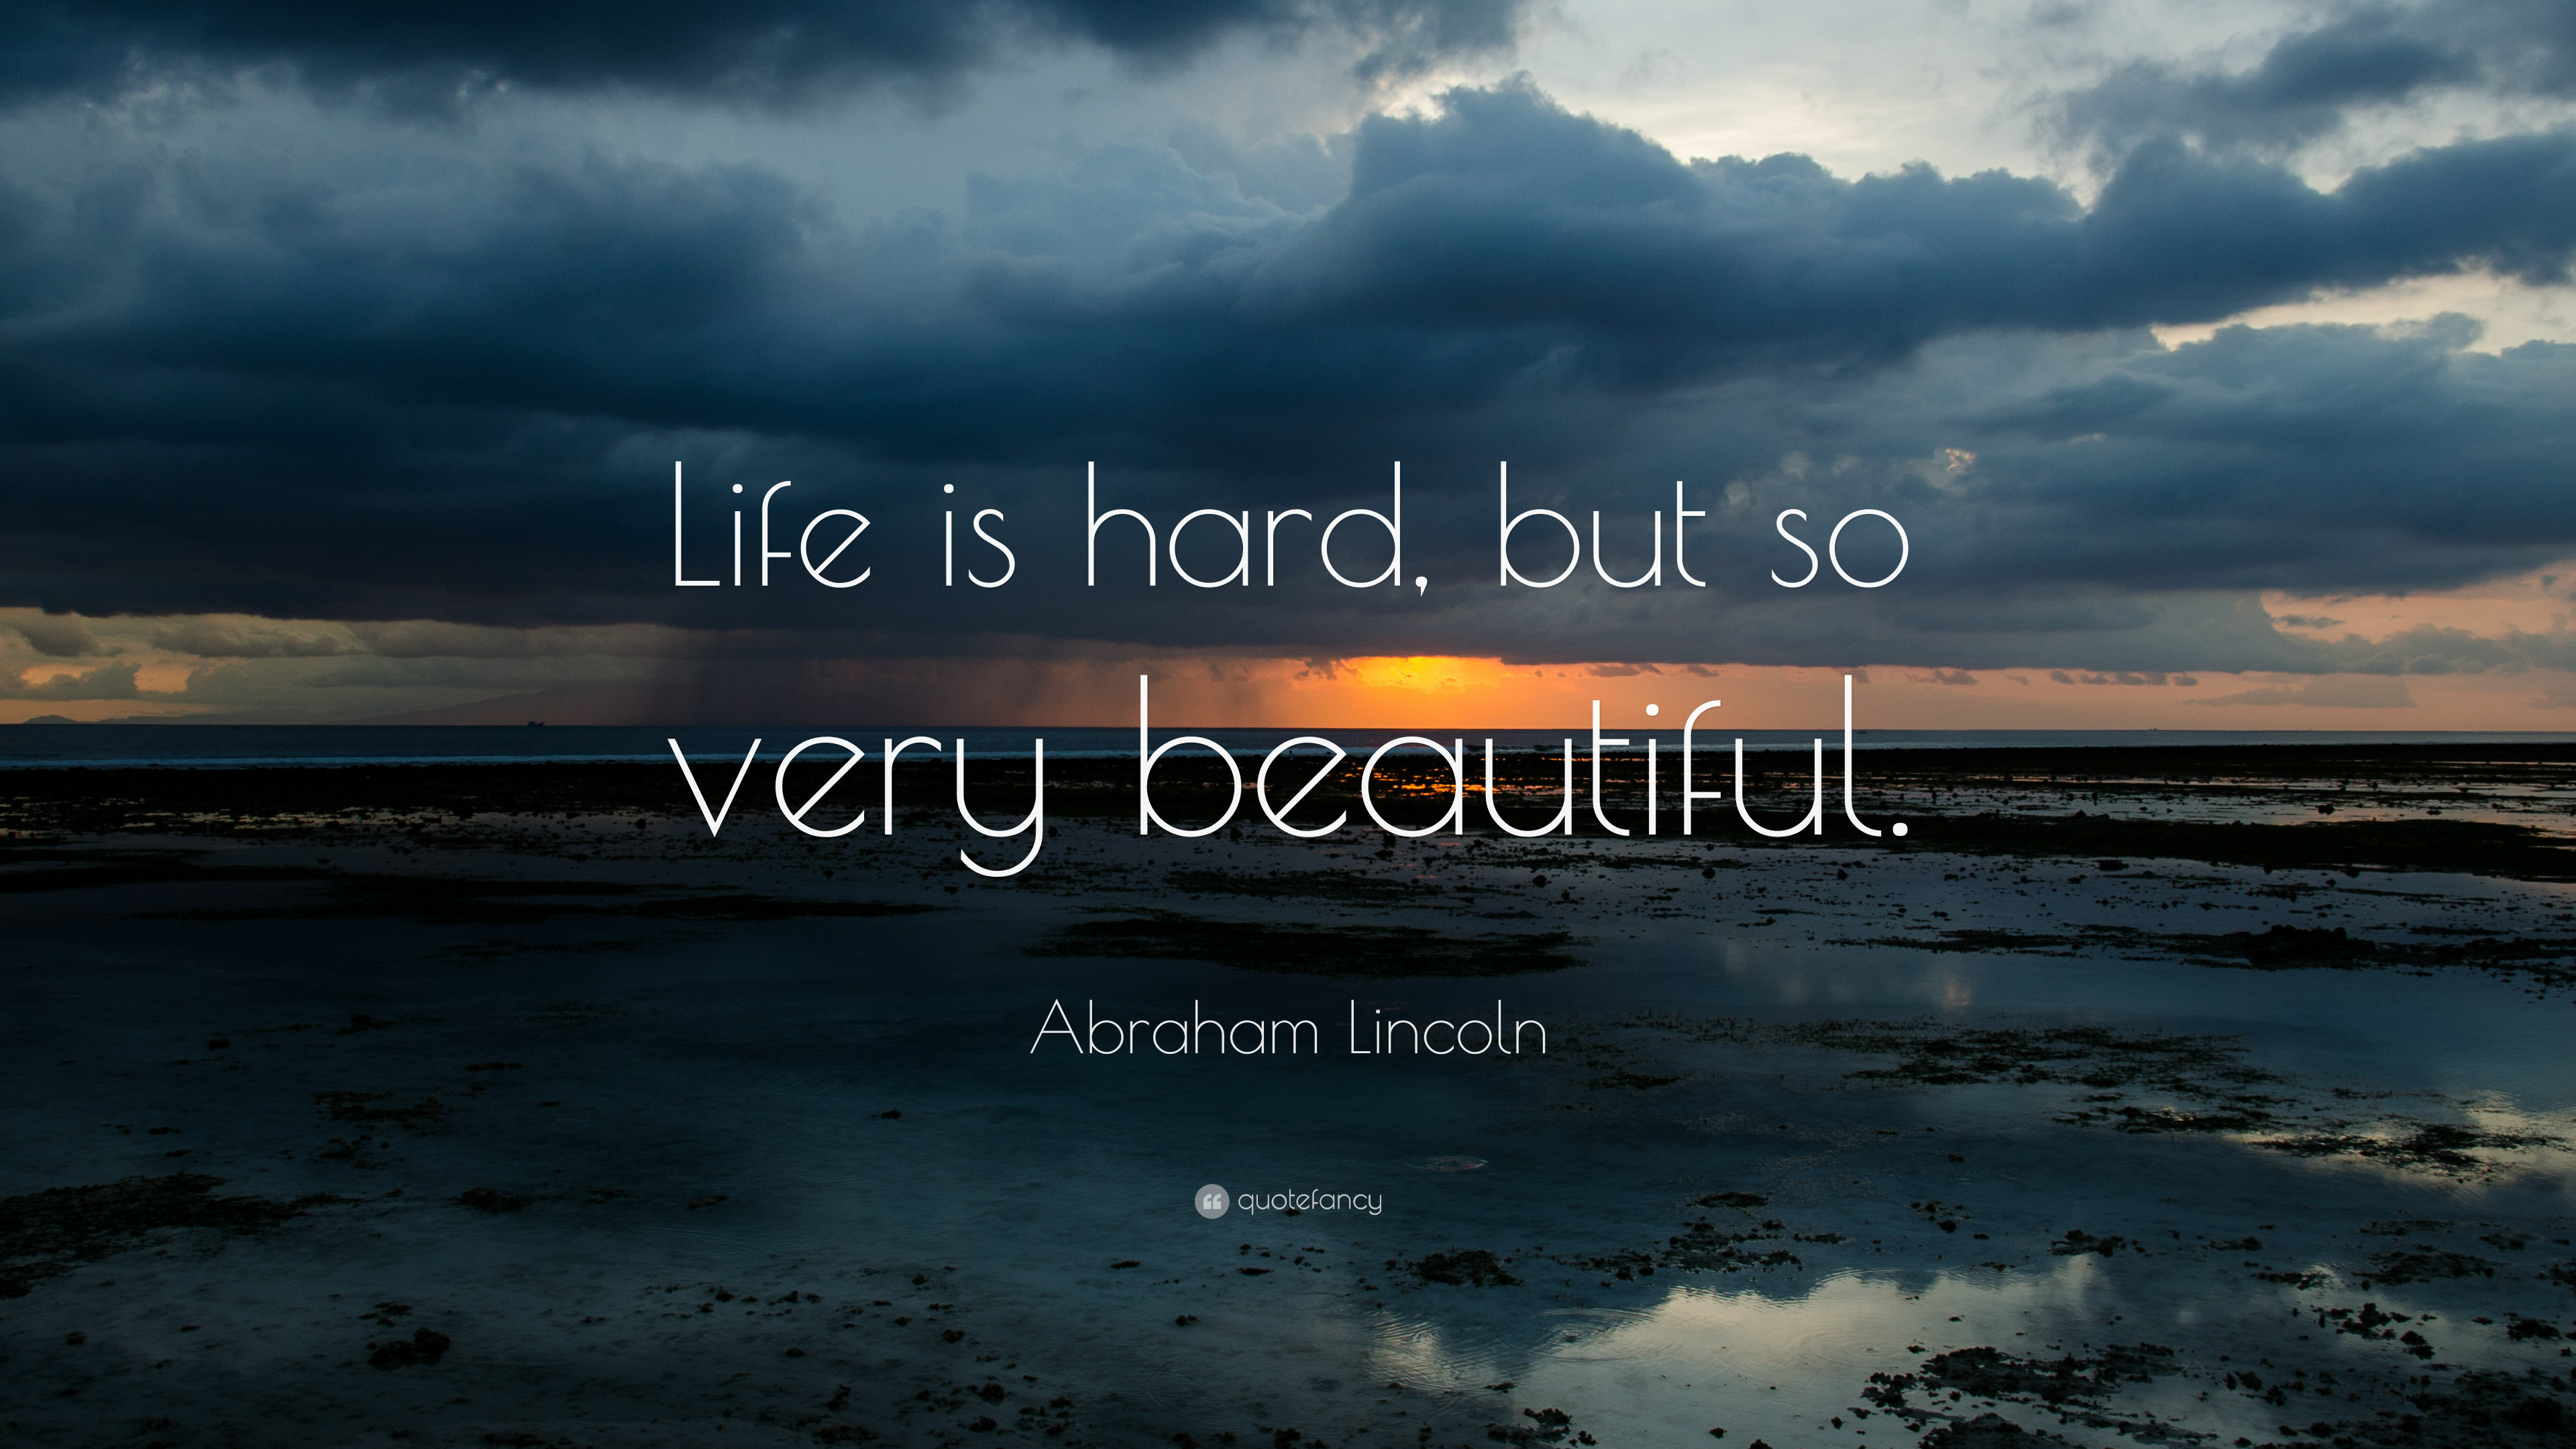 Abraham Lincoln Quote - Change You Want To See - HD Wallpaper 